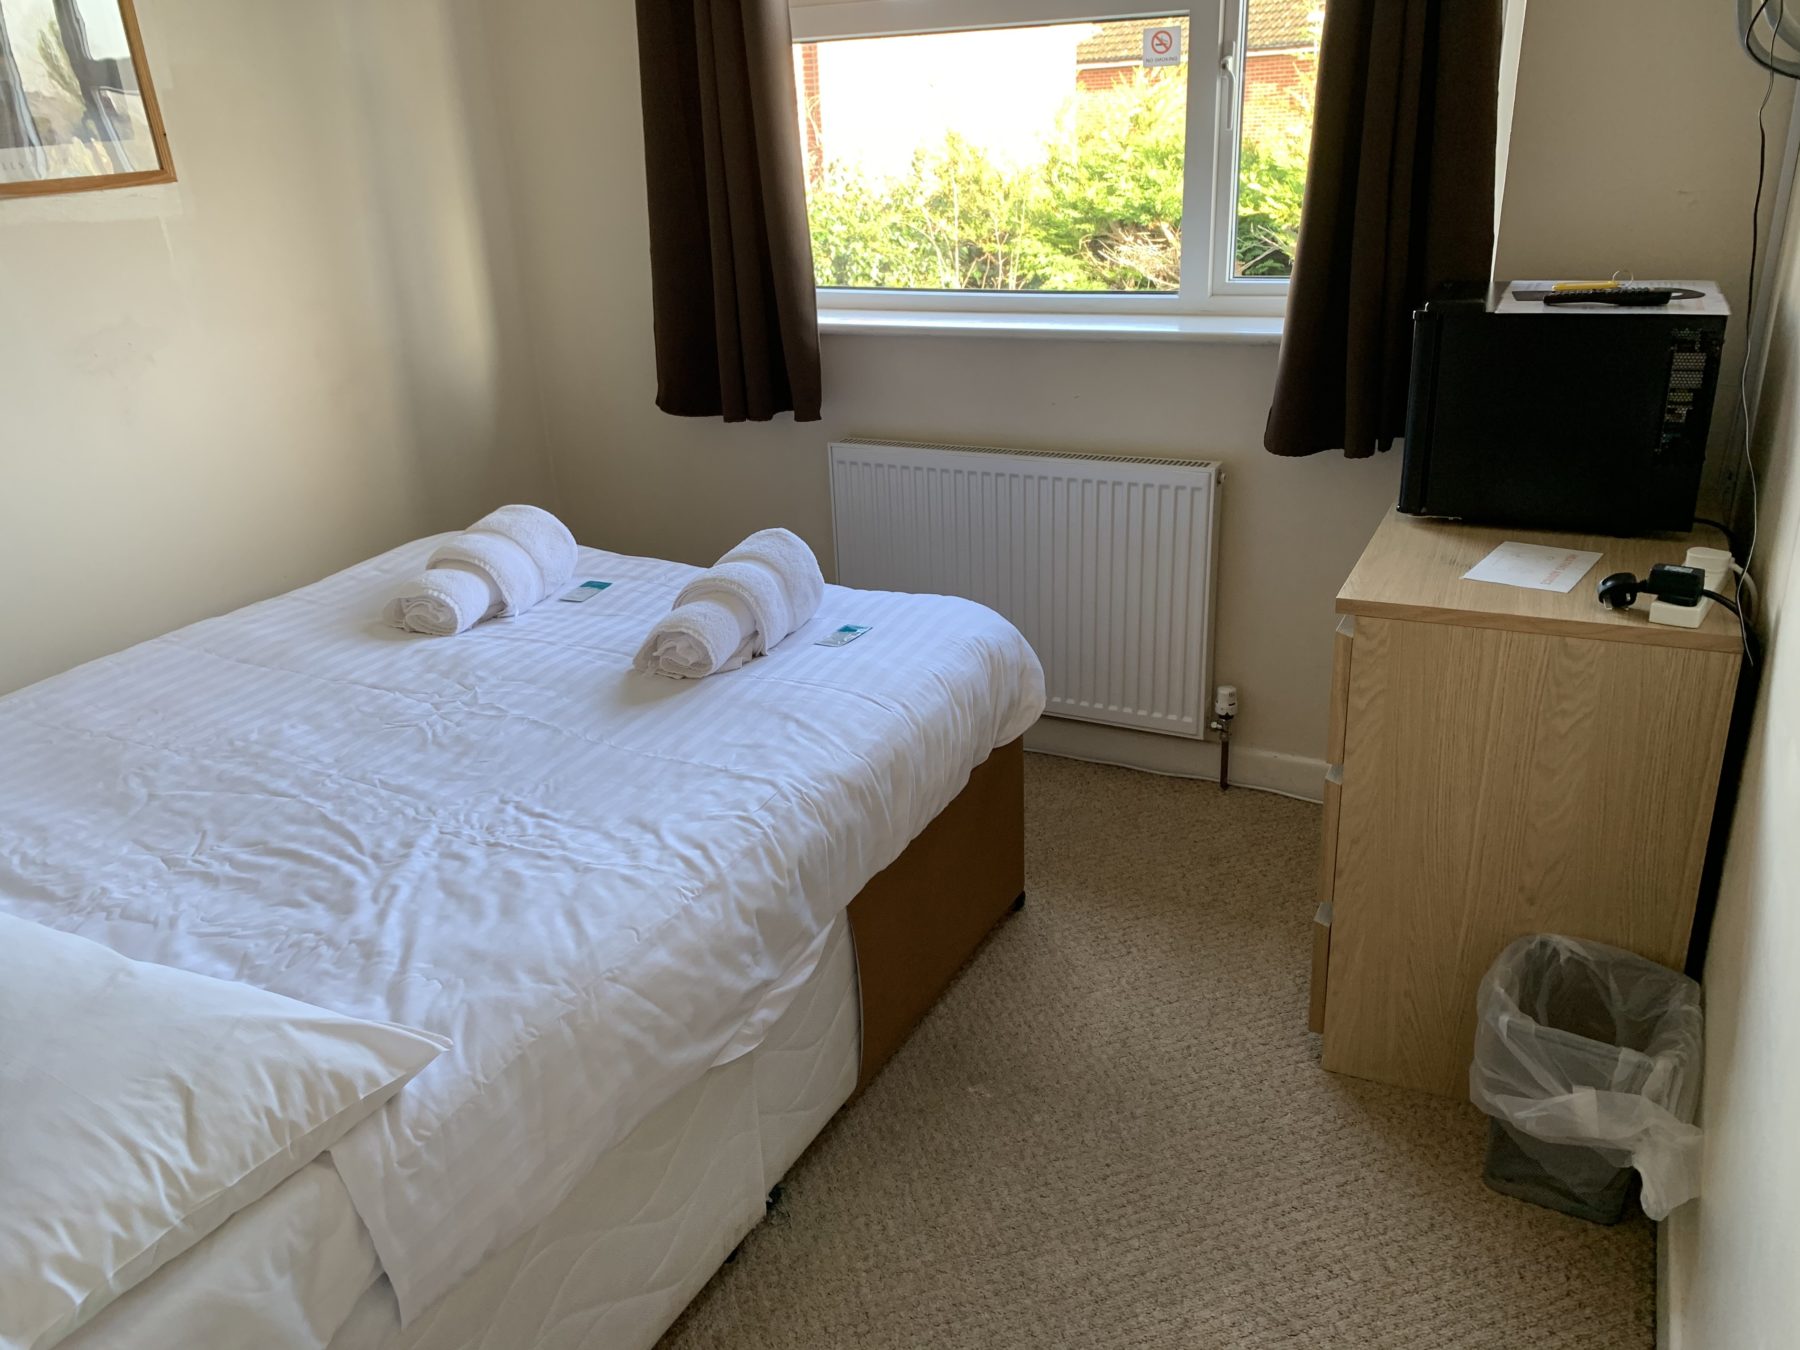 Room 2 – small double room